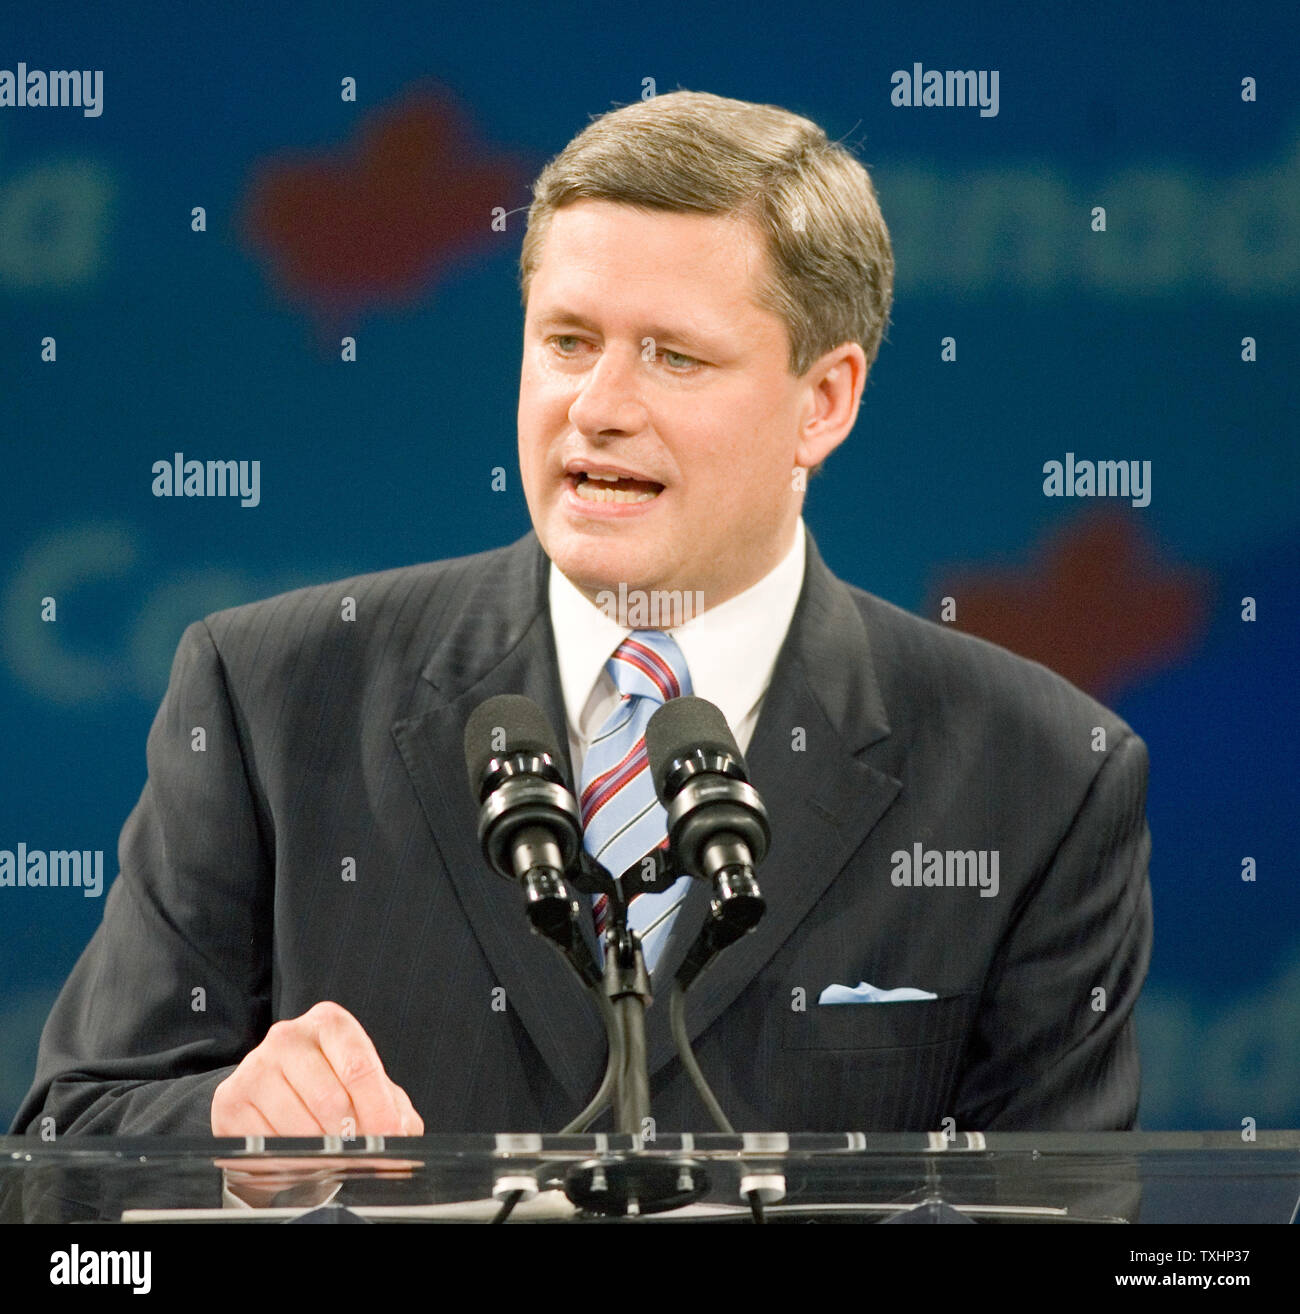 Federal Conservative leader Stephen Harper gives his victory speech to supporters at his campaign headquarters in the Telus Convention Center in Calgary, Alberta after winning the Canada federal election with a minority, January 23, 2006. (UPI Photo/Heinz Ruckemann) Stock Photo